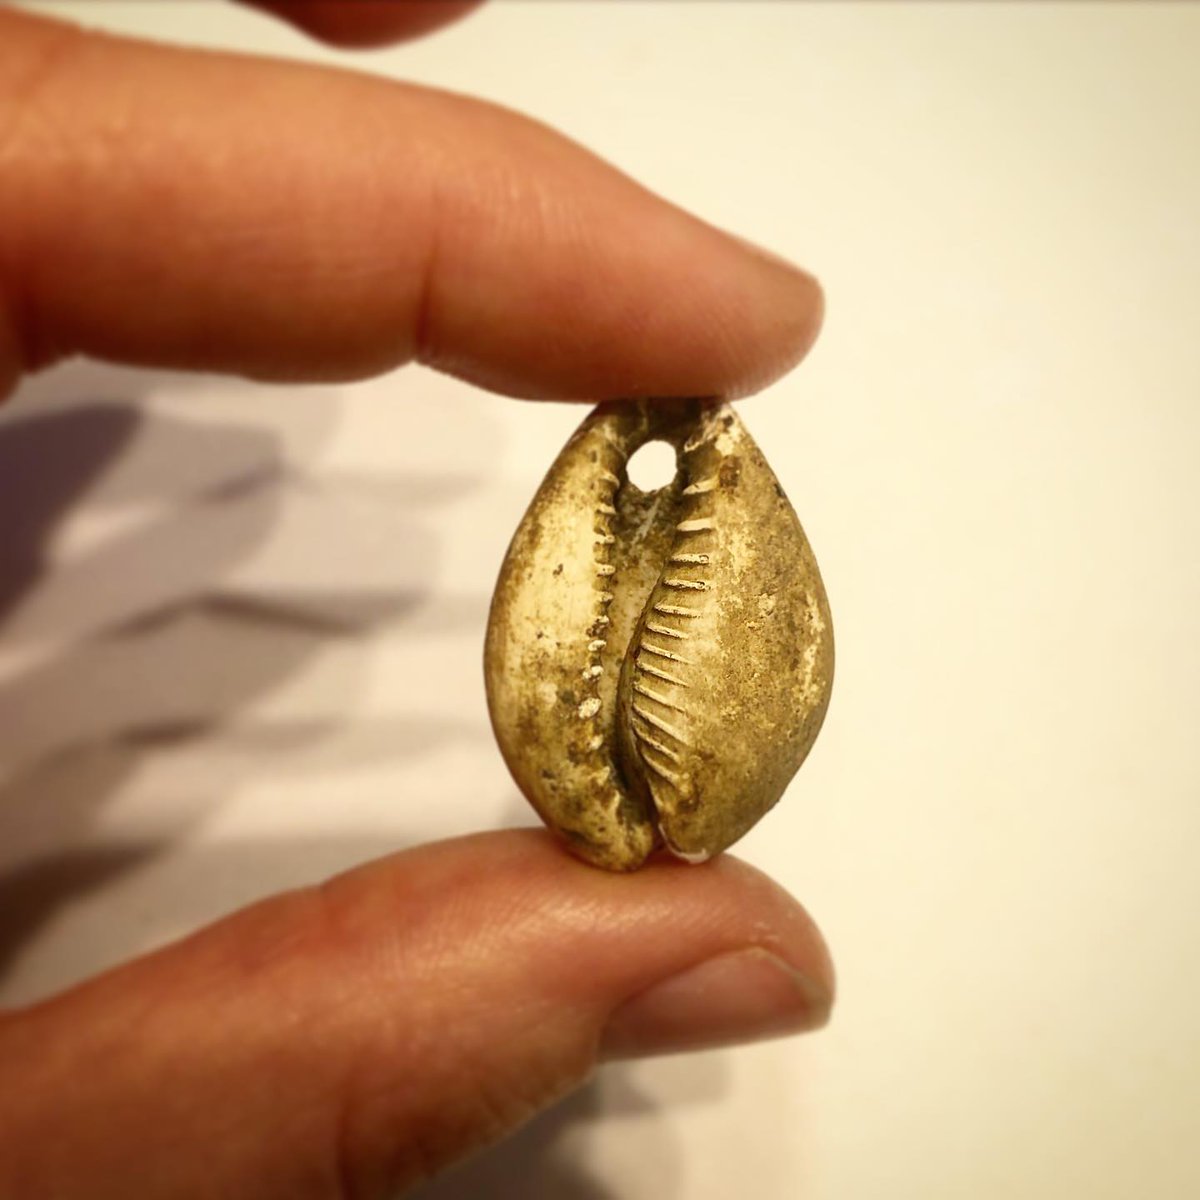 Thread: We have a very special find to share with you today. This pierced cowrie shell was recovered from a deposit sitting atop an 18th-century privy during excavations in the basement of Lathrop Place, a set of 1835 row houses in the area known as North Square, which has been..